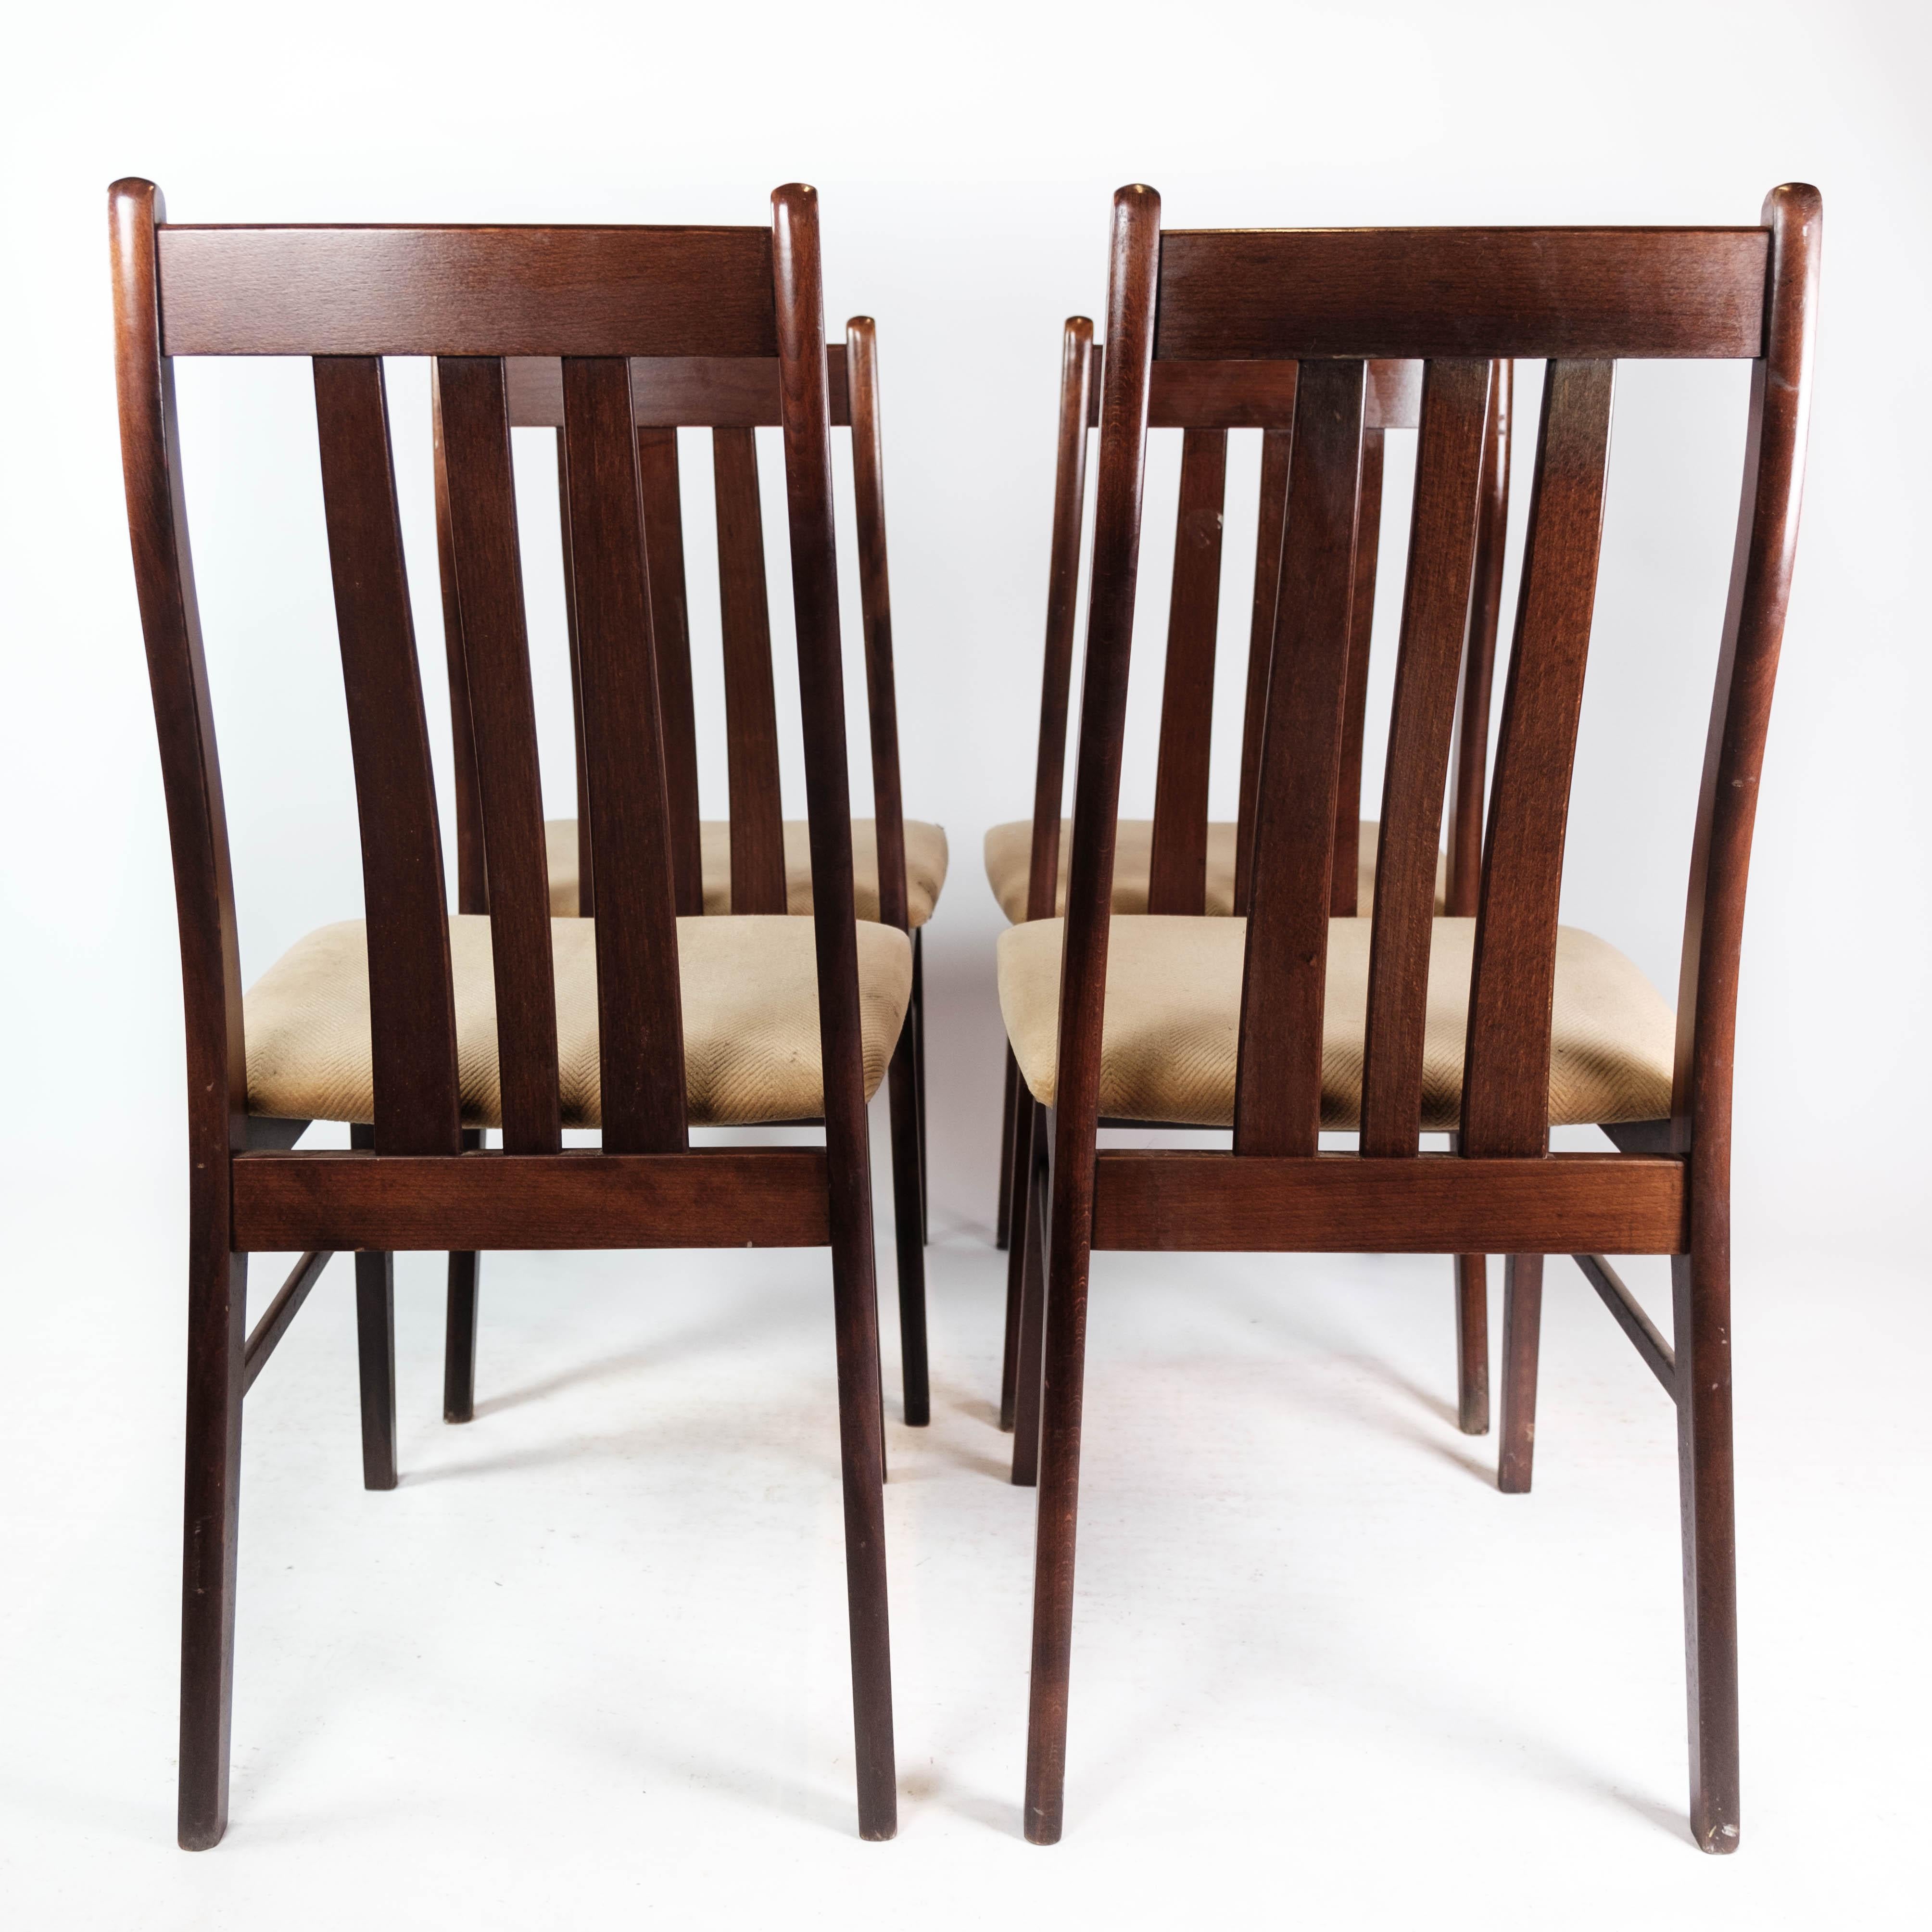 Set of Four Dining Room Chairs Made In Mahogany By Farstrup From 1960s For Sale 1